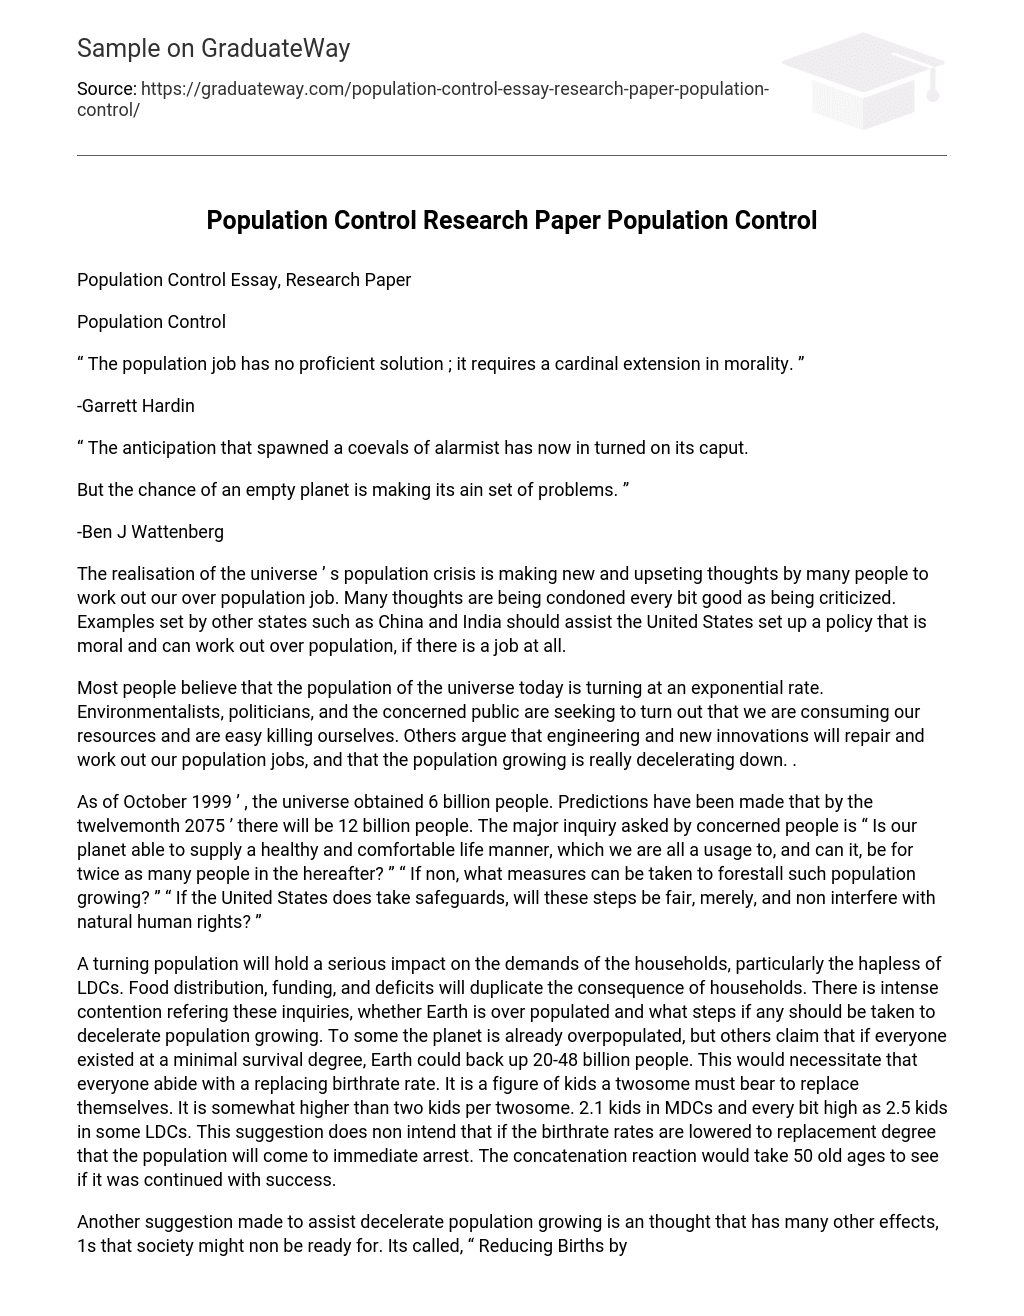 Population Control Research Paper Population Control